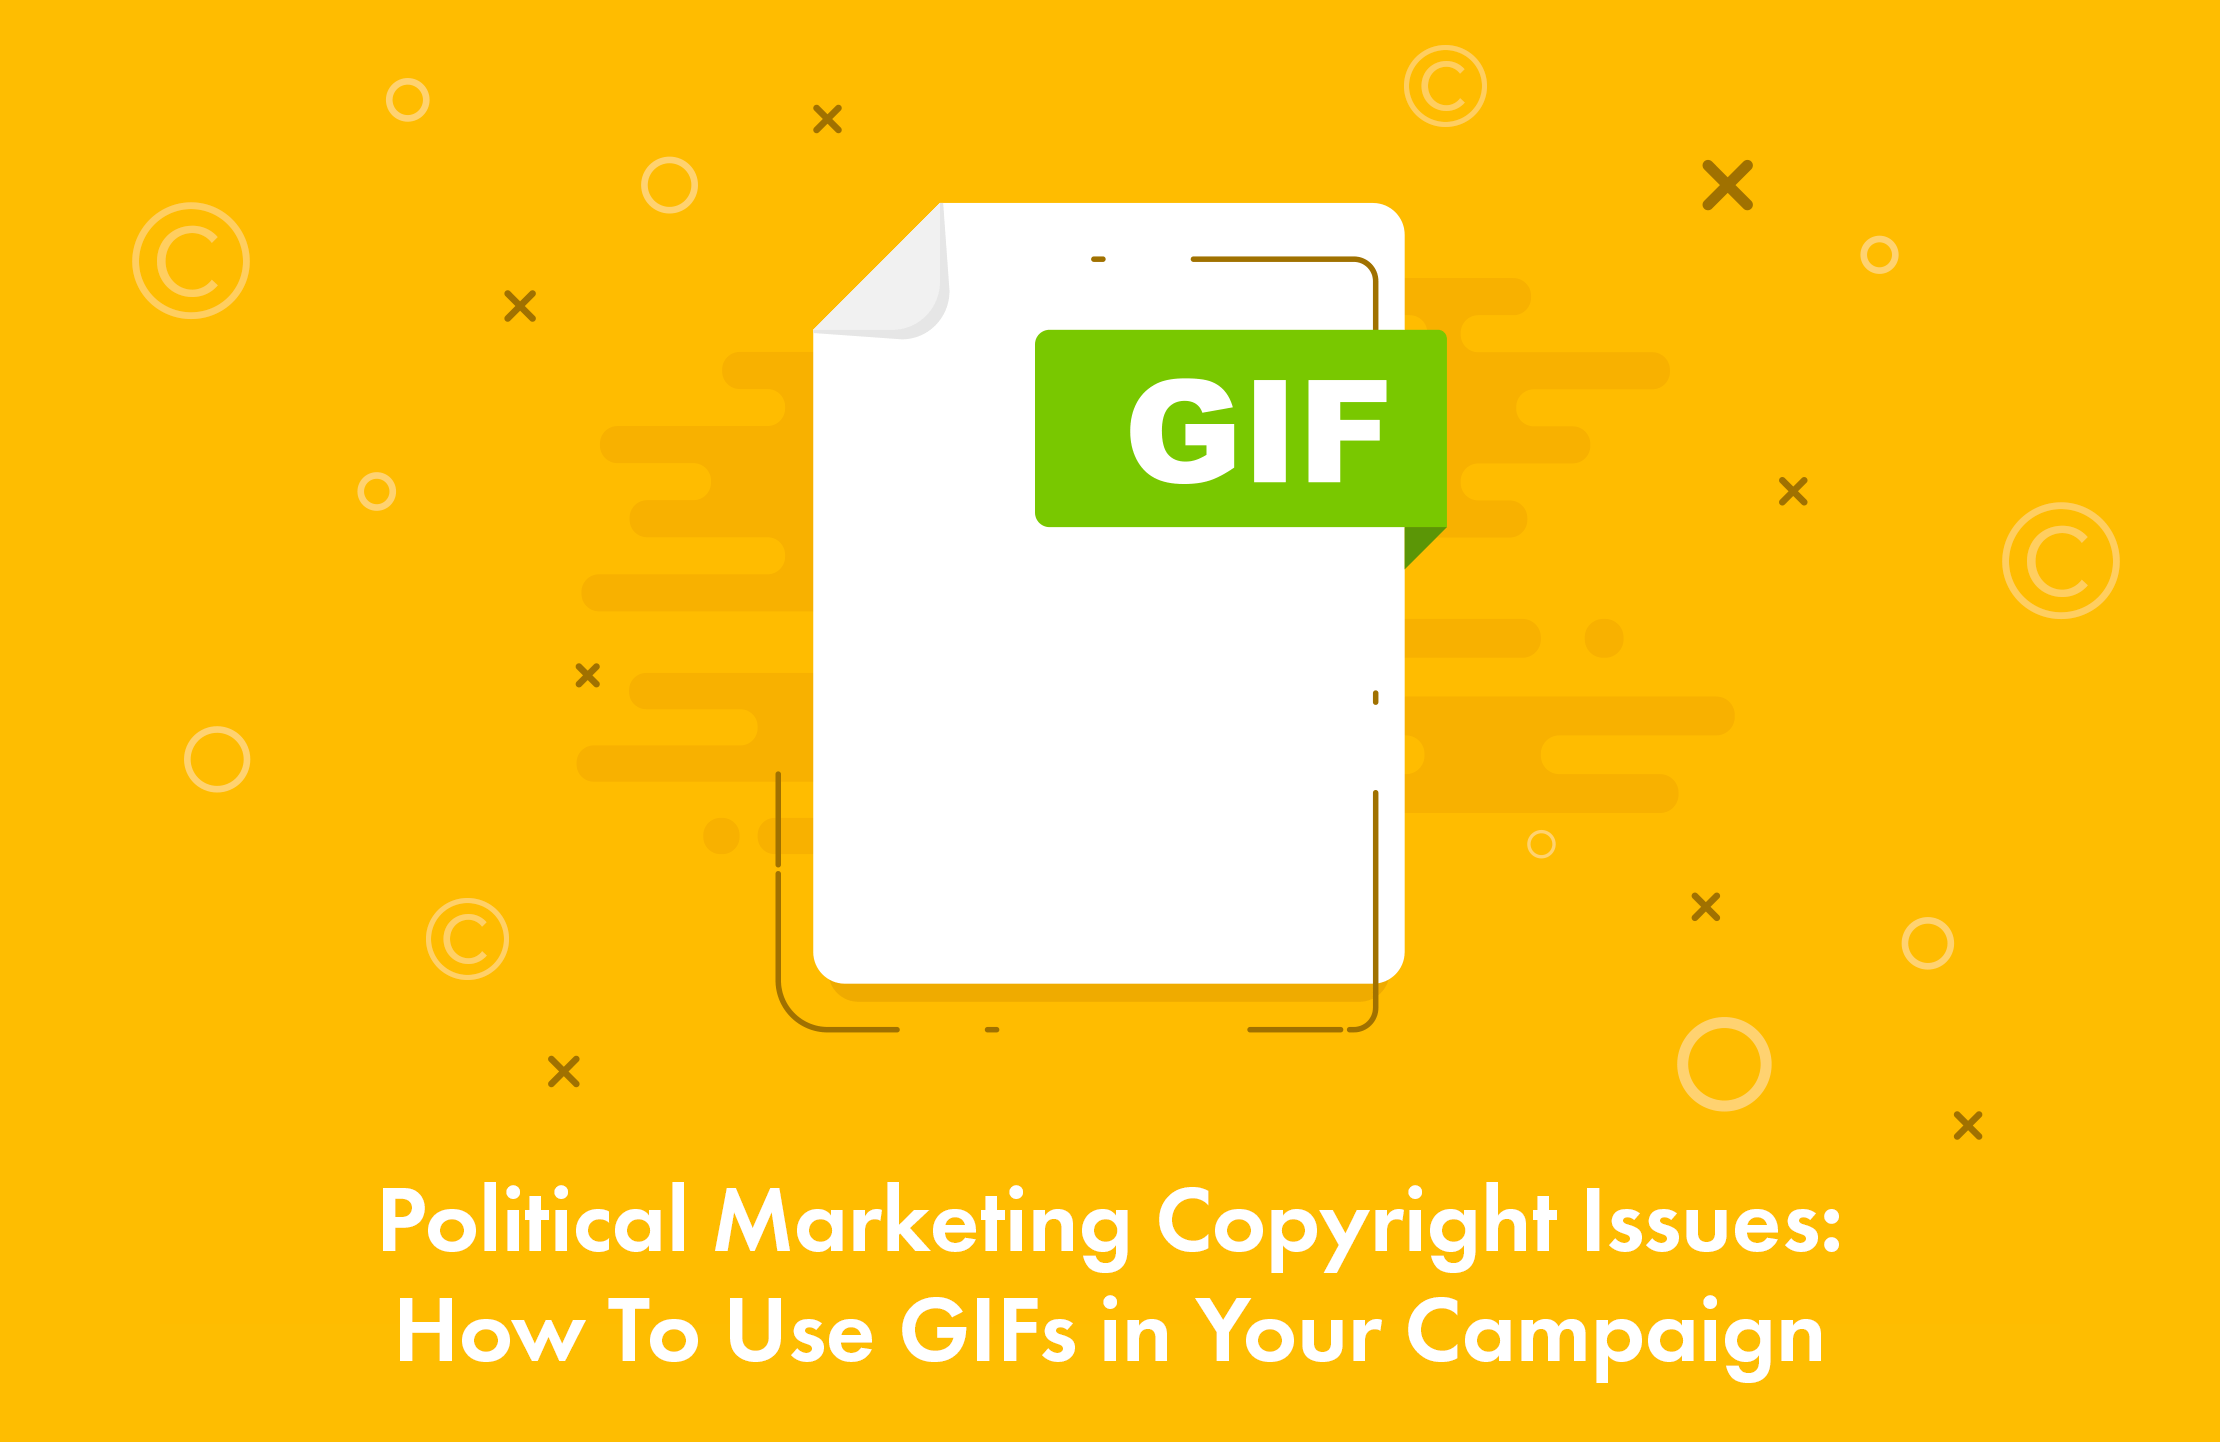 Political Marketing Copyright Issues How To Use GIFs in Your Campaign